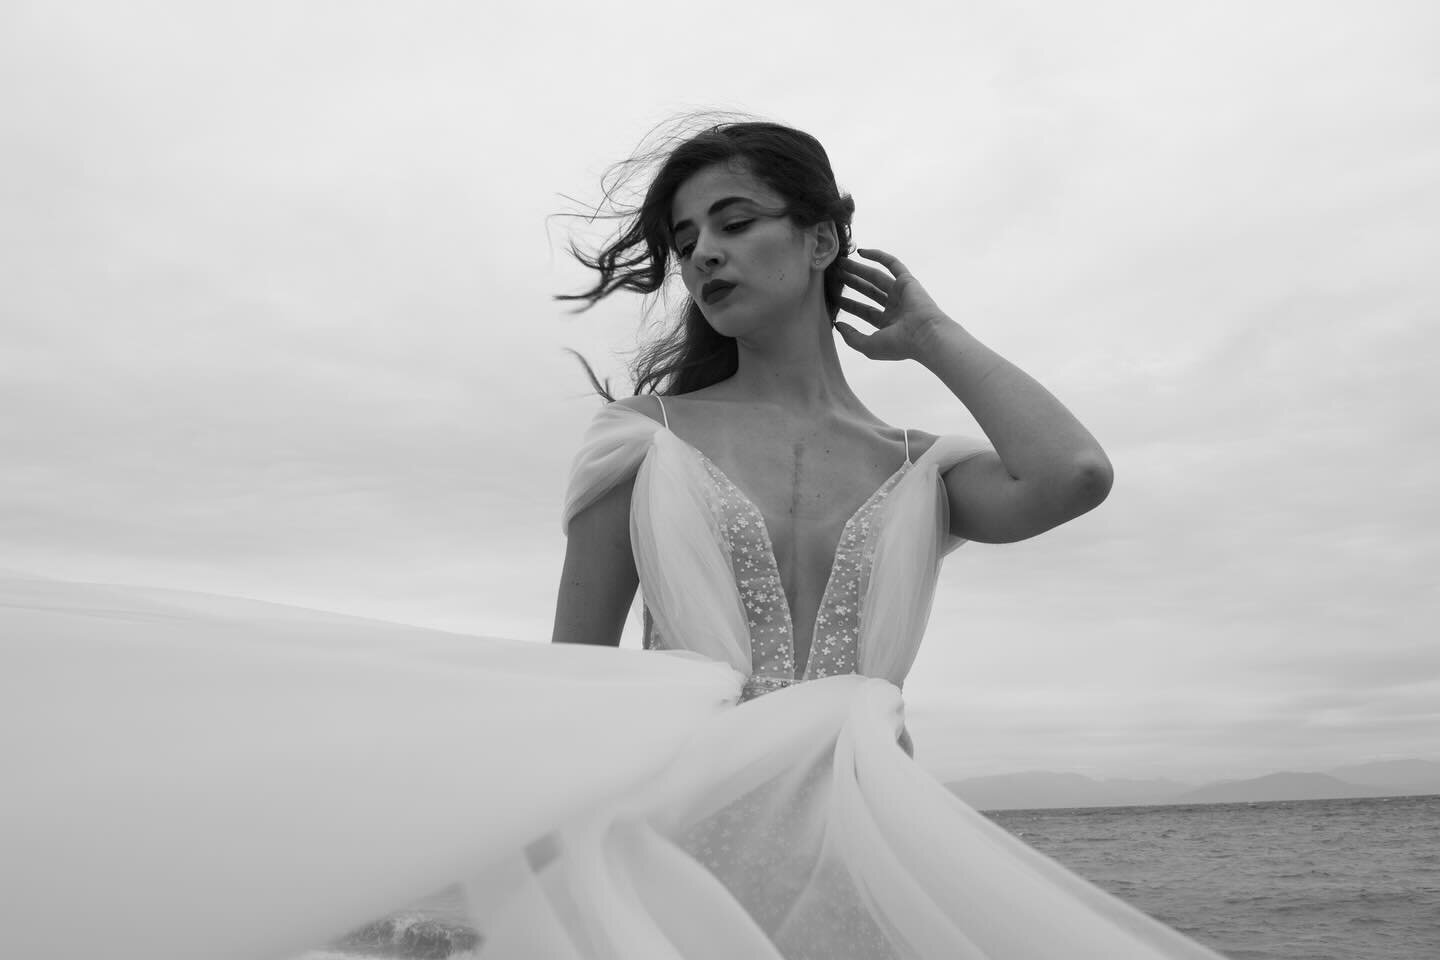 Many of you are asking us what makes our Manto Grammenou atelier unique.
It&rsquo;s a range of customization options that allows brides to create their dream gown that reflects their individual style and personality. From fabric selection to intricat